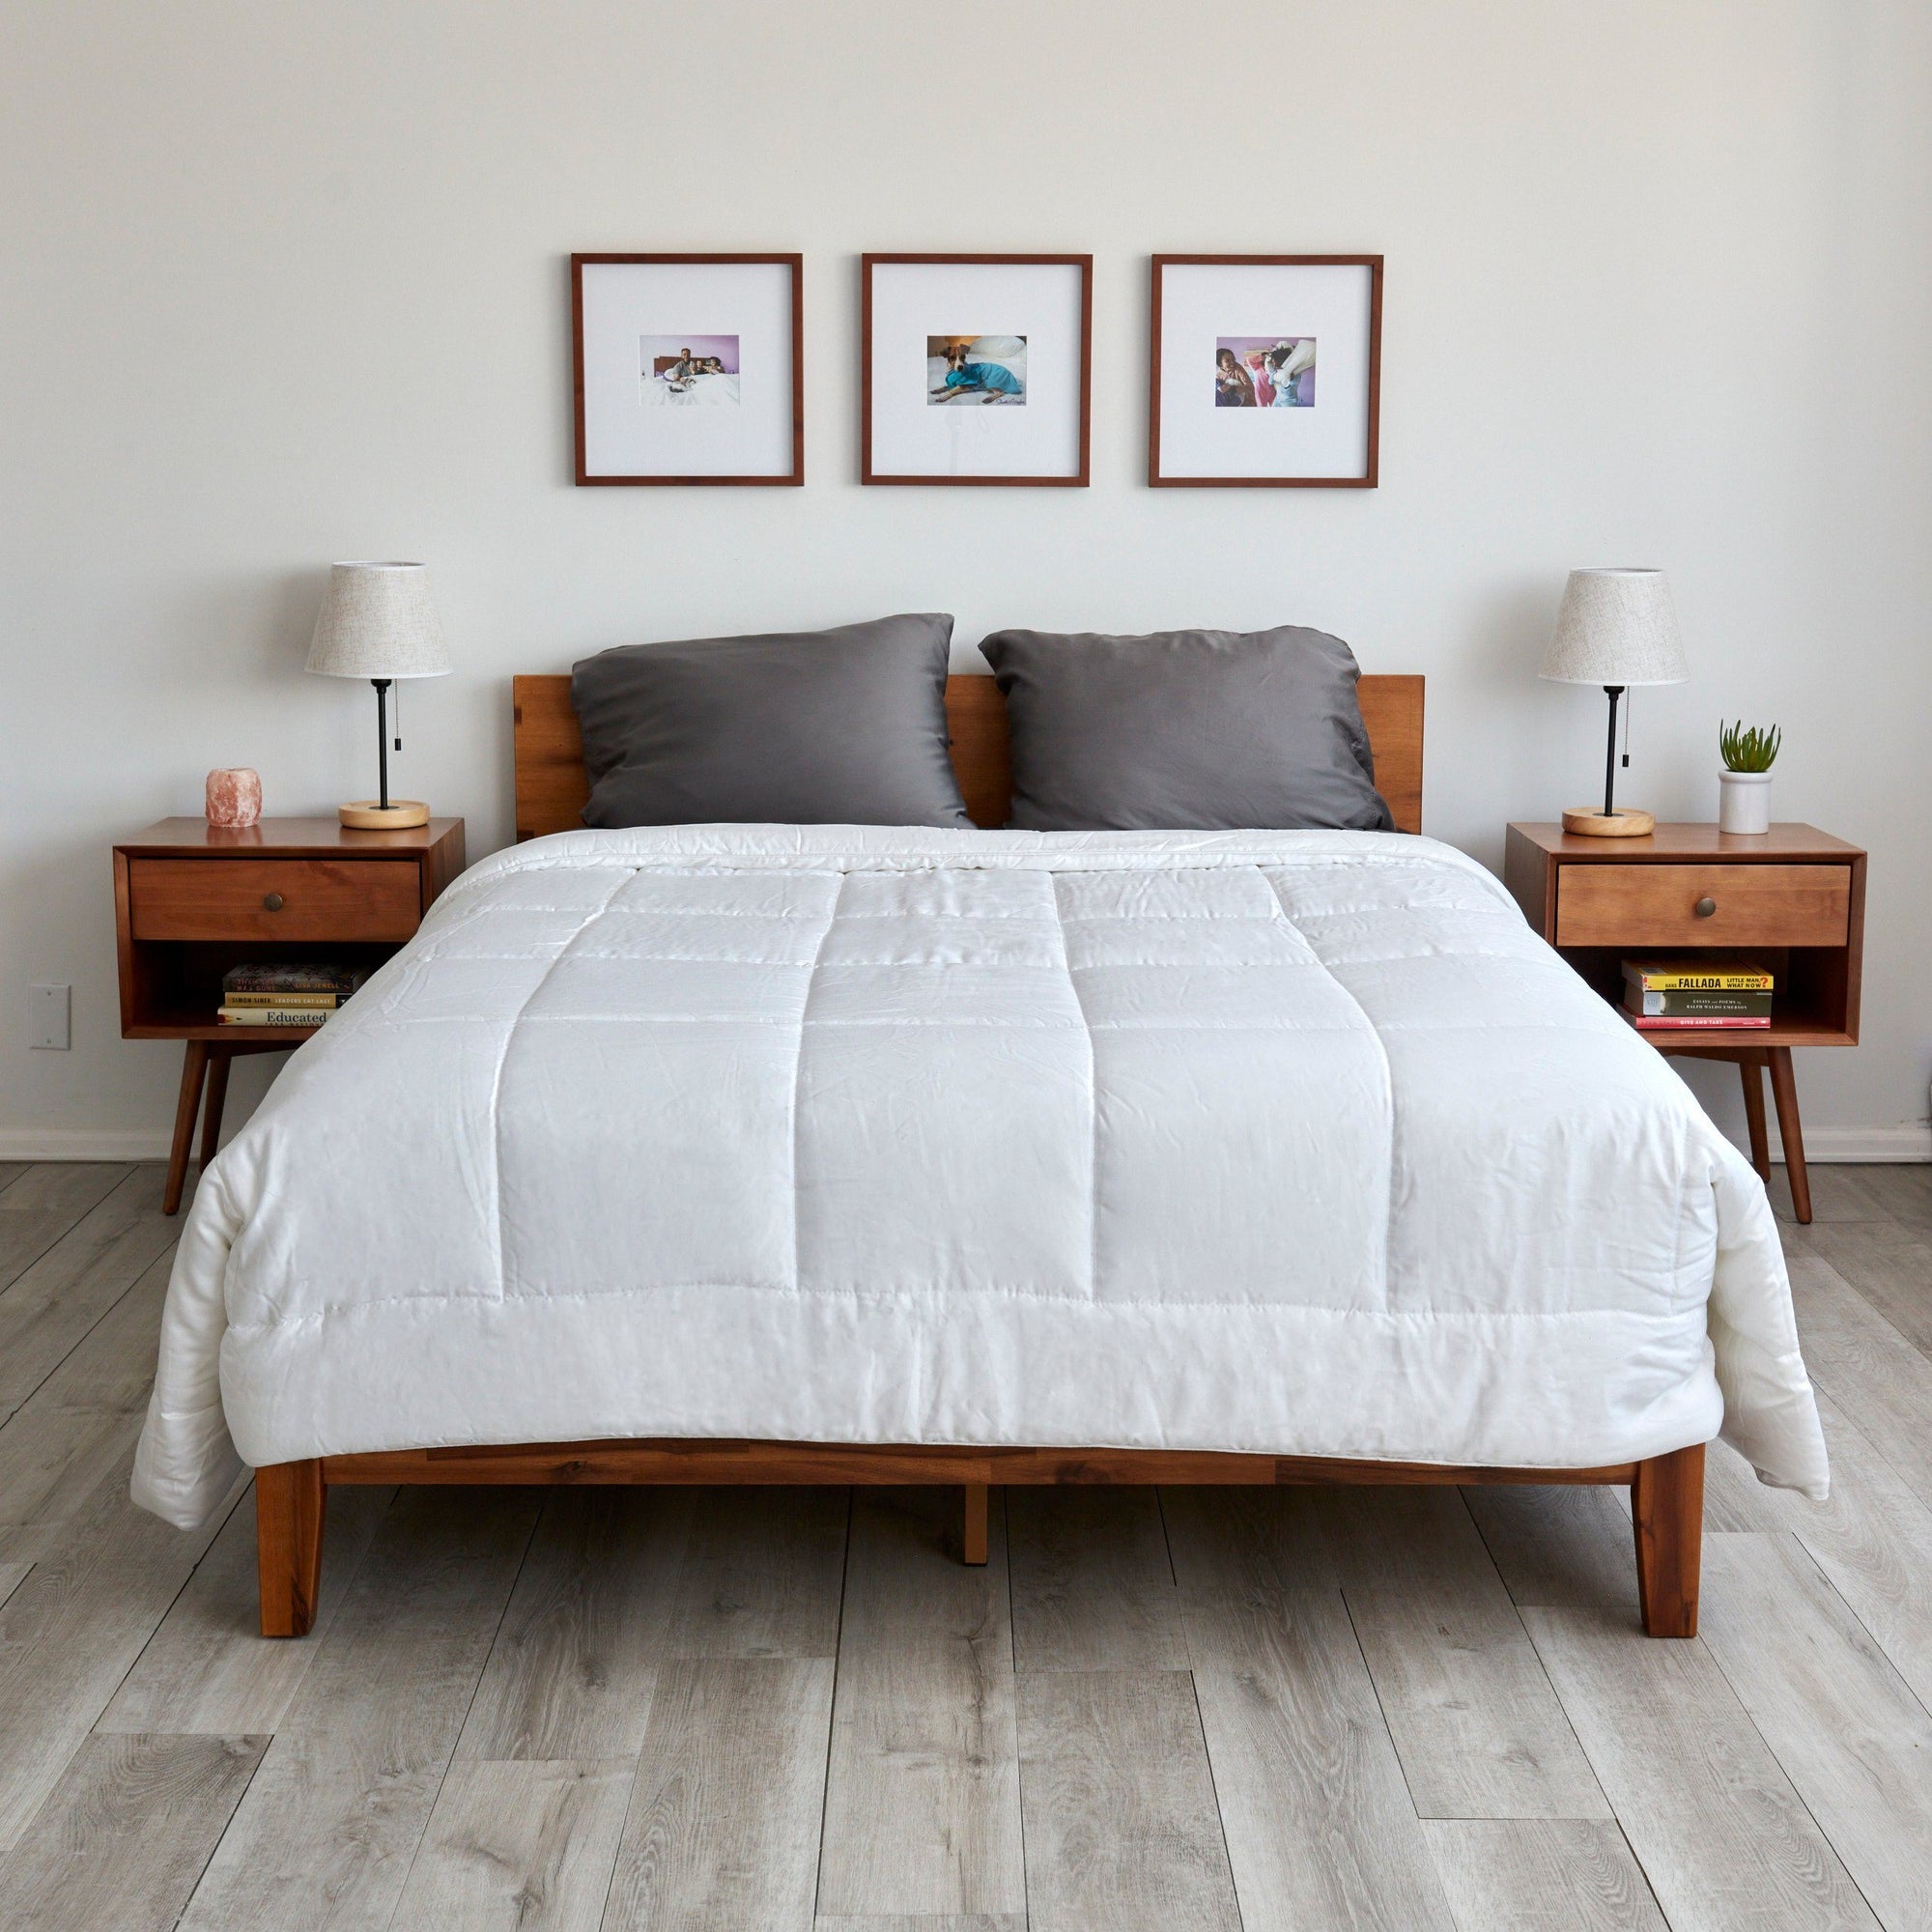 Sheets & Giggles - Eco Friendly and Sustainable Bedding Products for Your Home